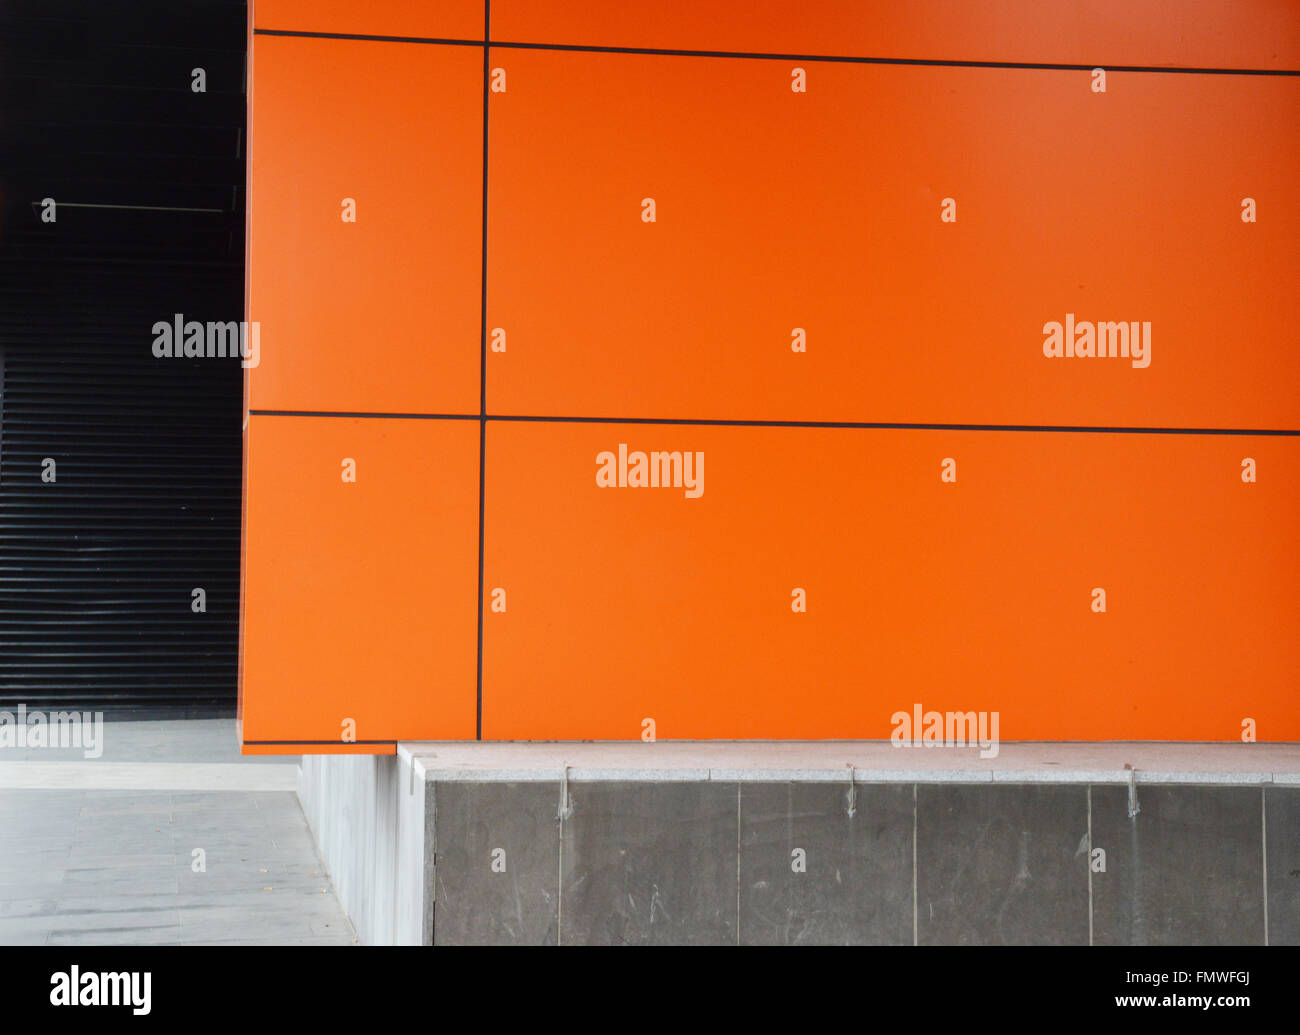 Building or Architecture. Orange and black feature on building Stock Photo